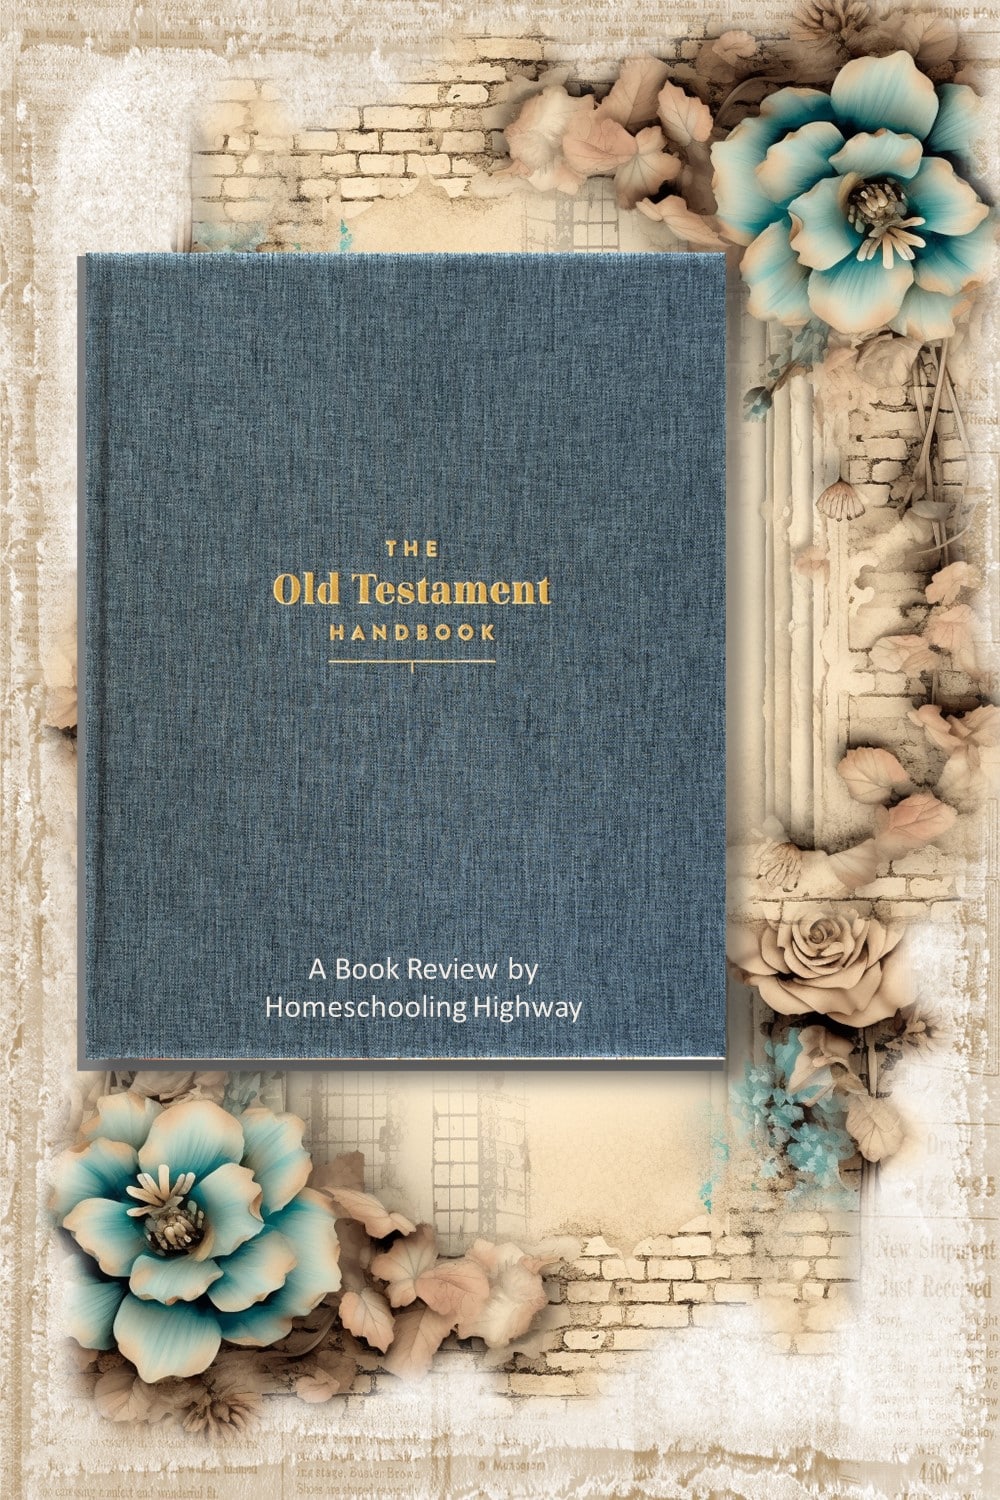 The Old Testament Handbook from B&H Publishing. Book reviewed by Homeschooling Highway